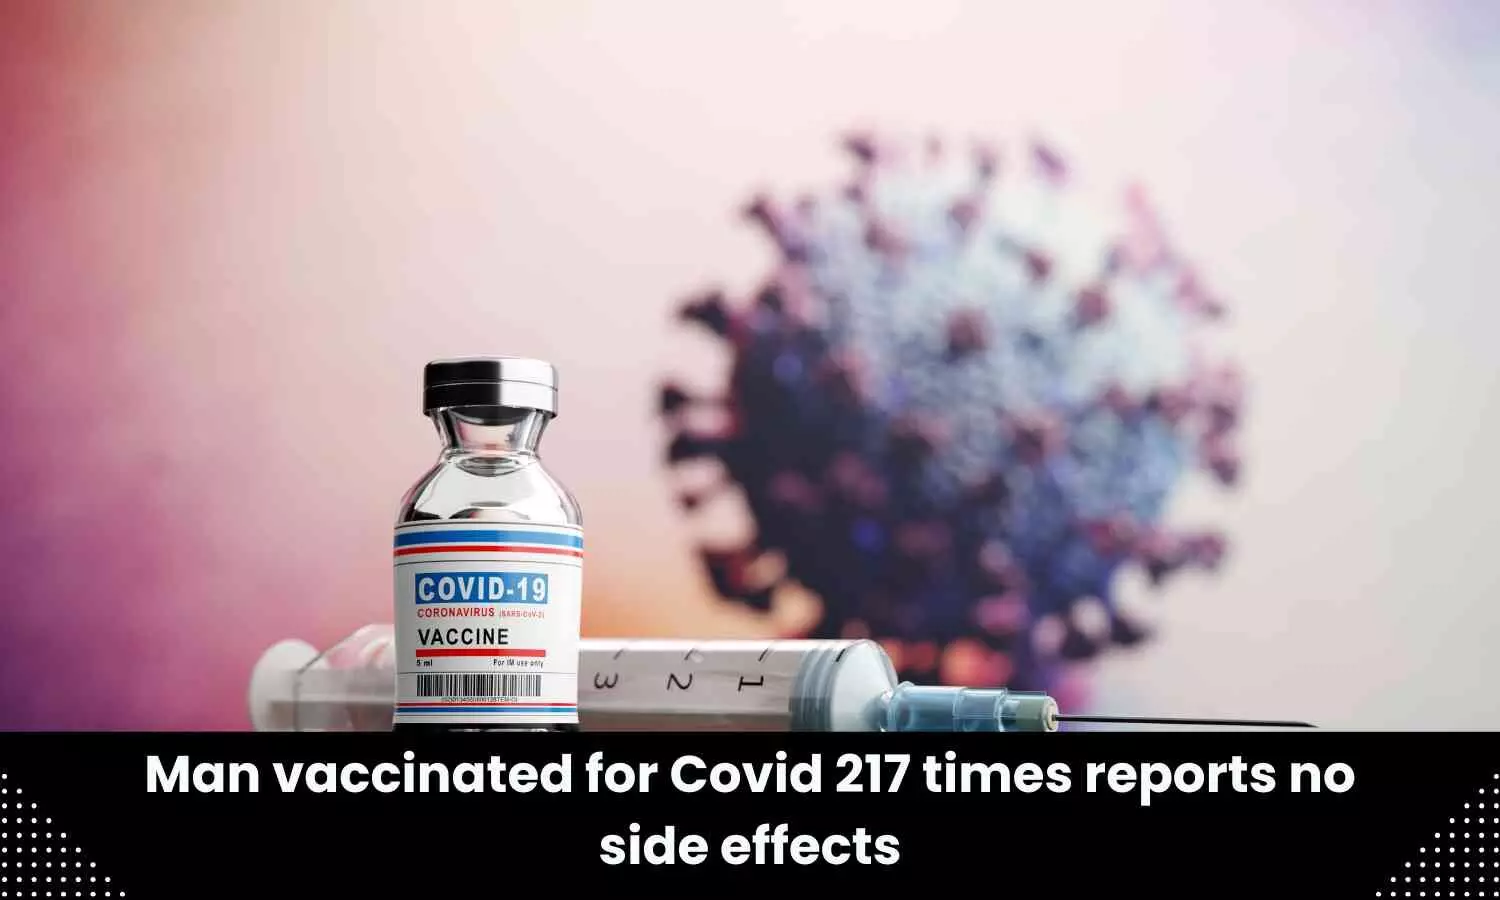 German man vaccinated for coronavirus 217 times reports no side effects: Scientists